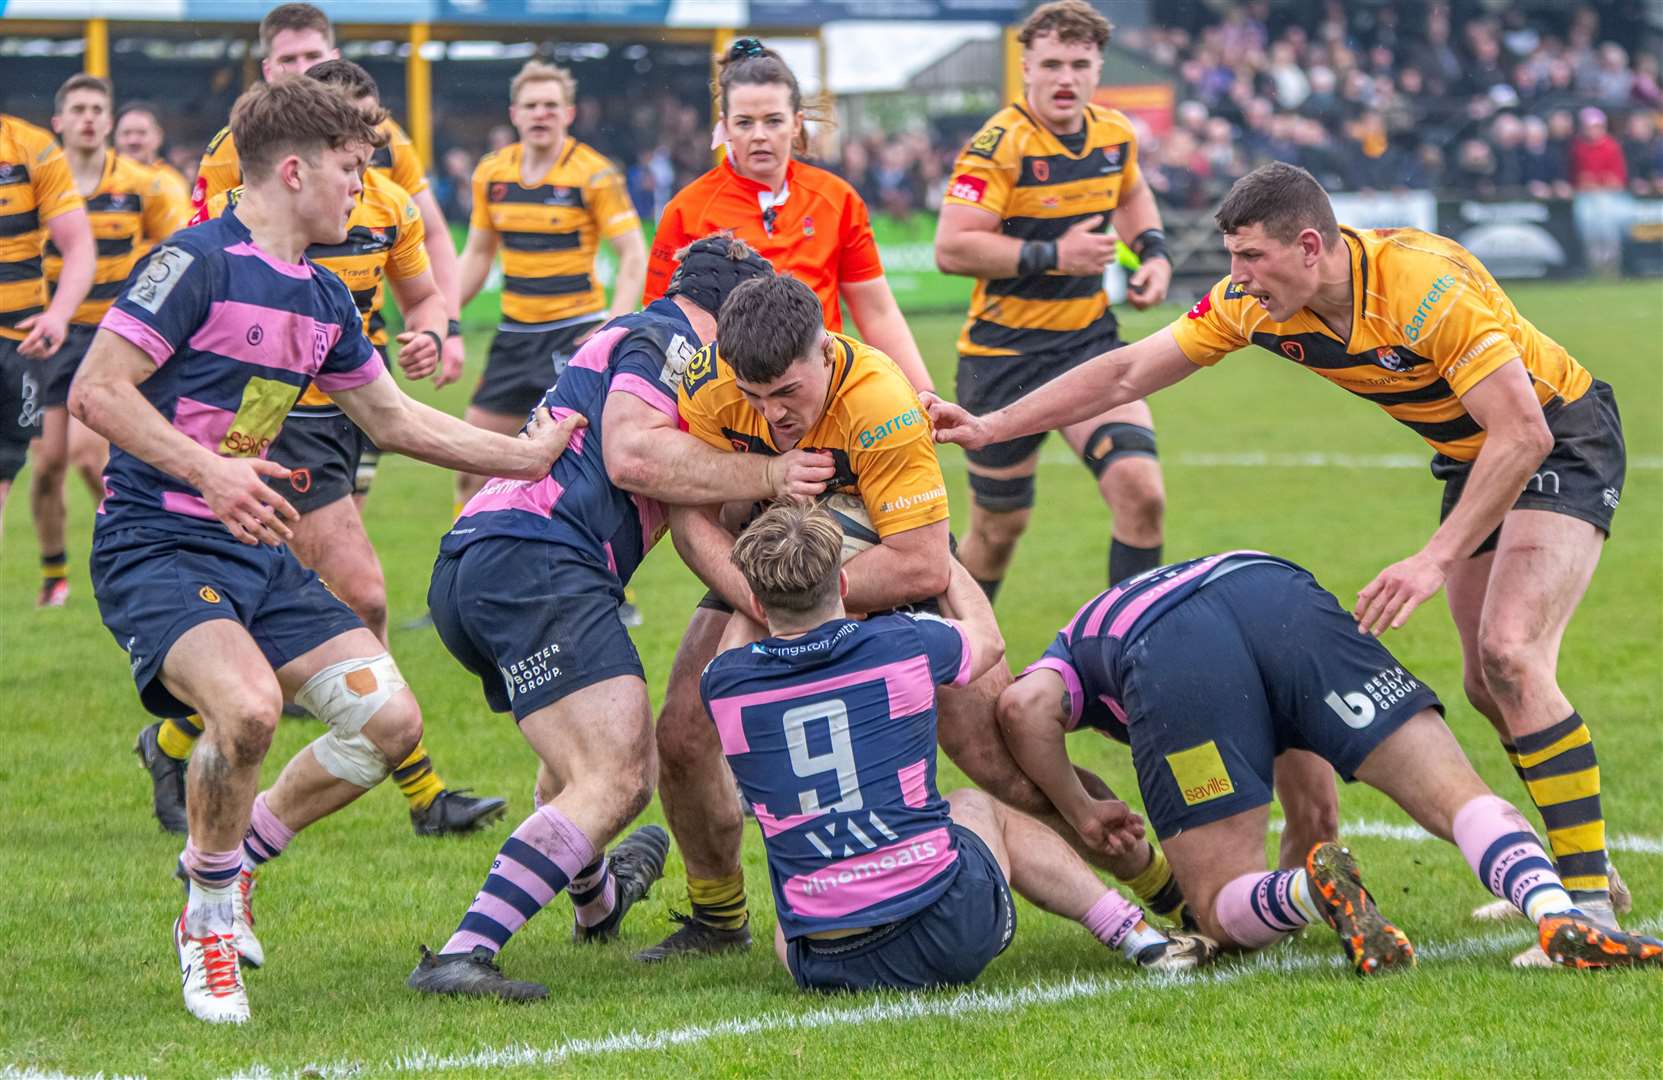 Canterbury's Eoin O'Donoghue in the thick of the action against Sevenoaks. Picture: Phillipa Hilton